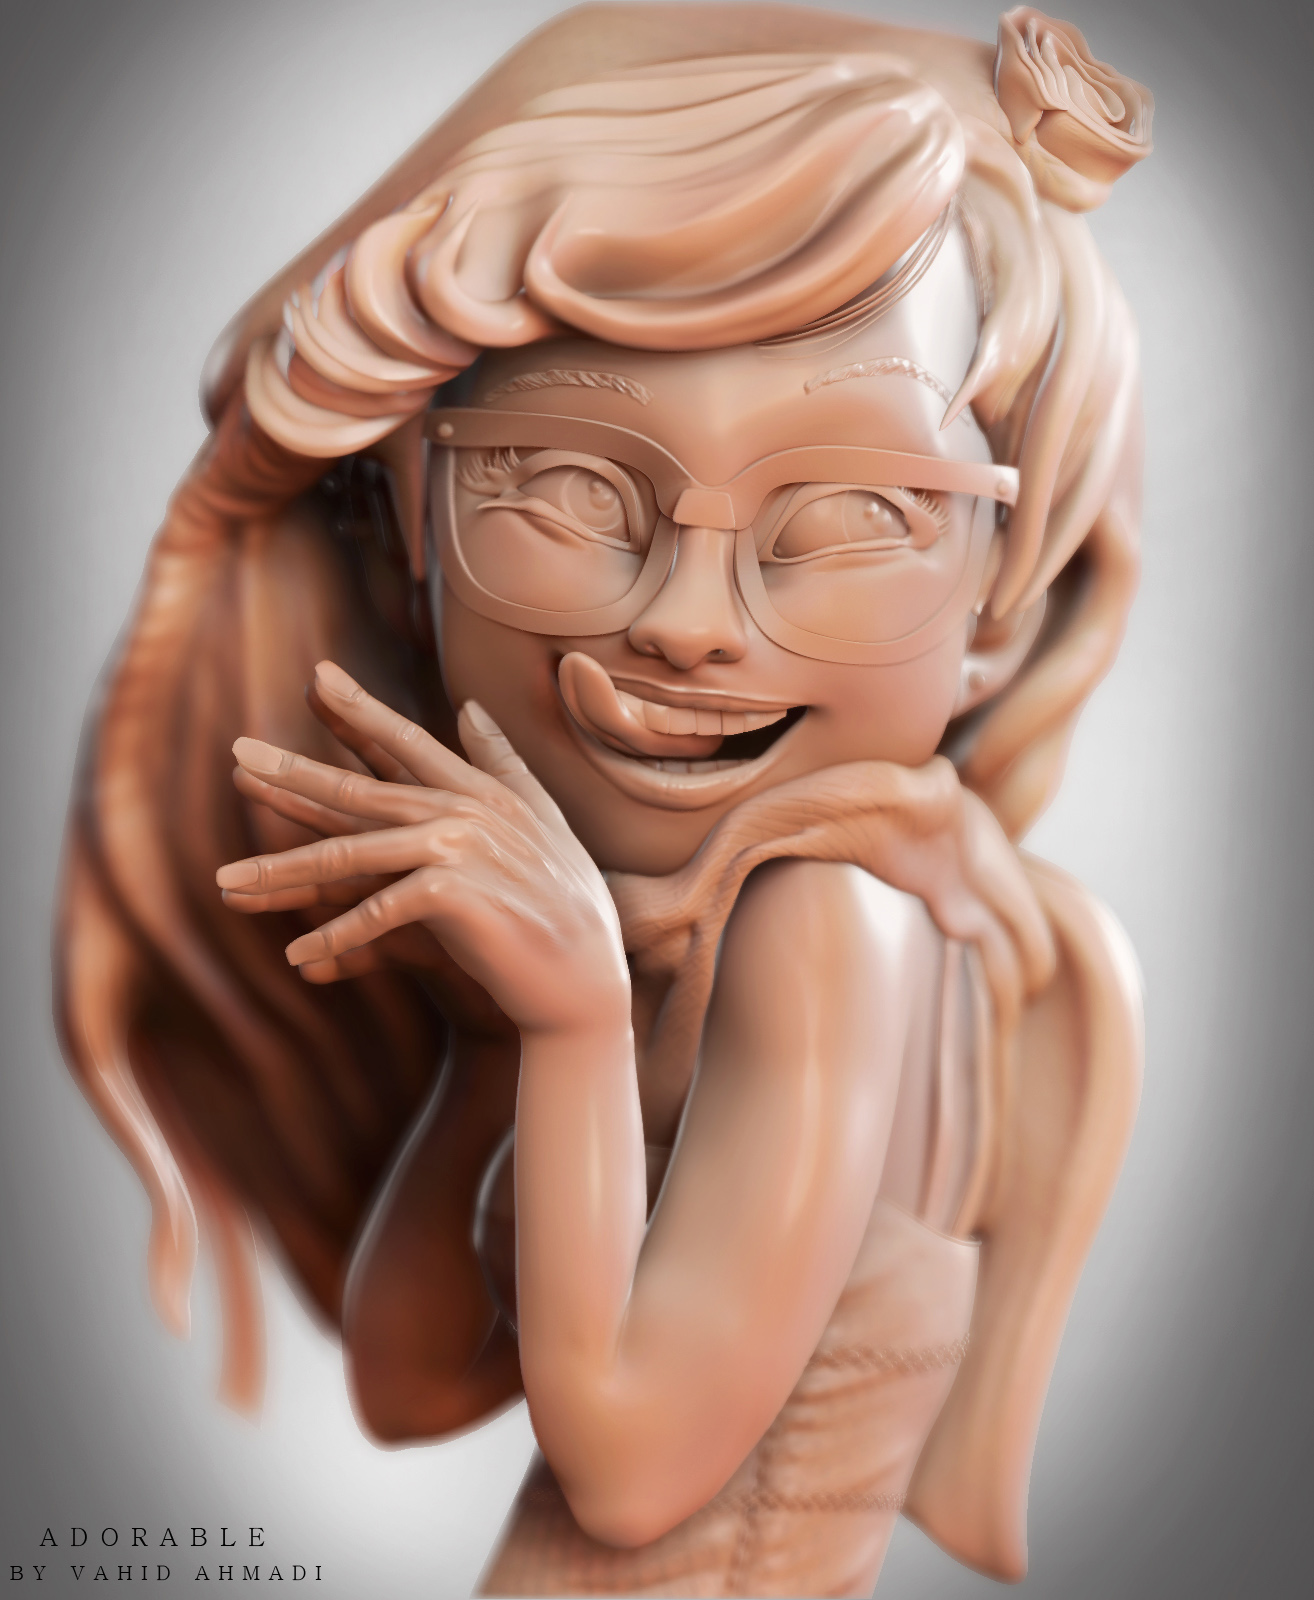 Adorable  by vahid ahmadi in zbrush and concept by salvador ramirez.jpg